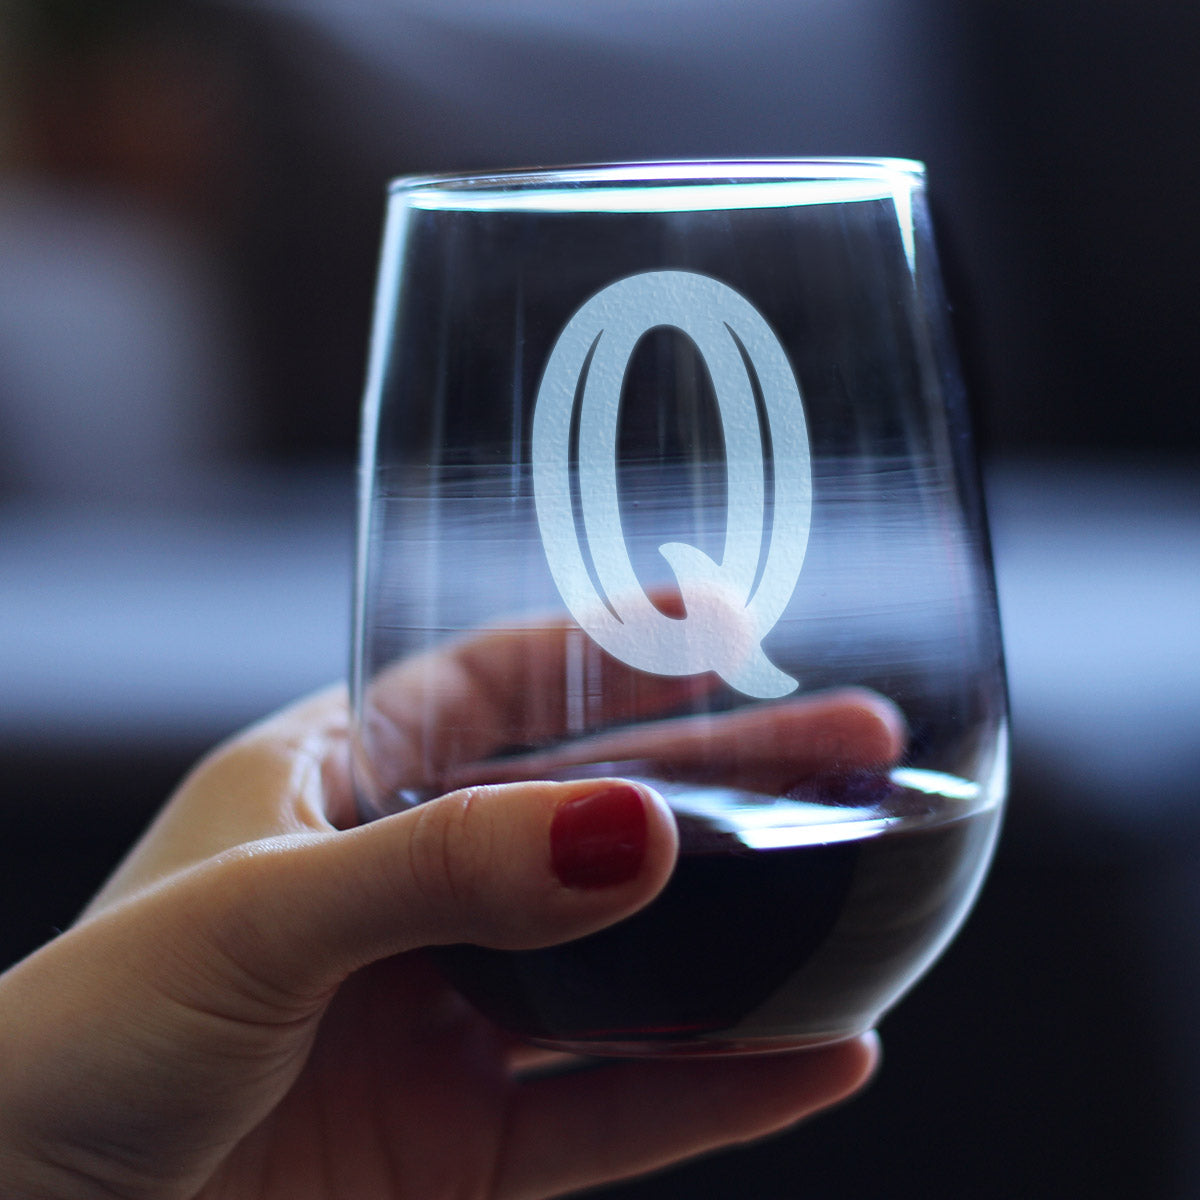 Monogram Bold Letter Q - Stemless Wine Glass - Personalized Gifts for Women and Men - Large Engraved Glasses